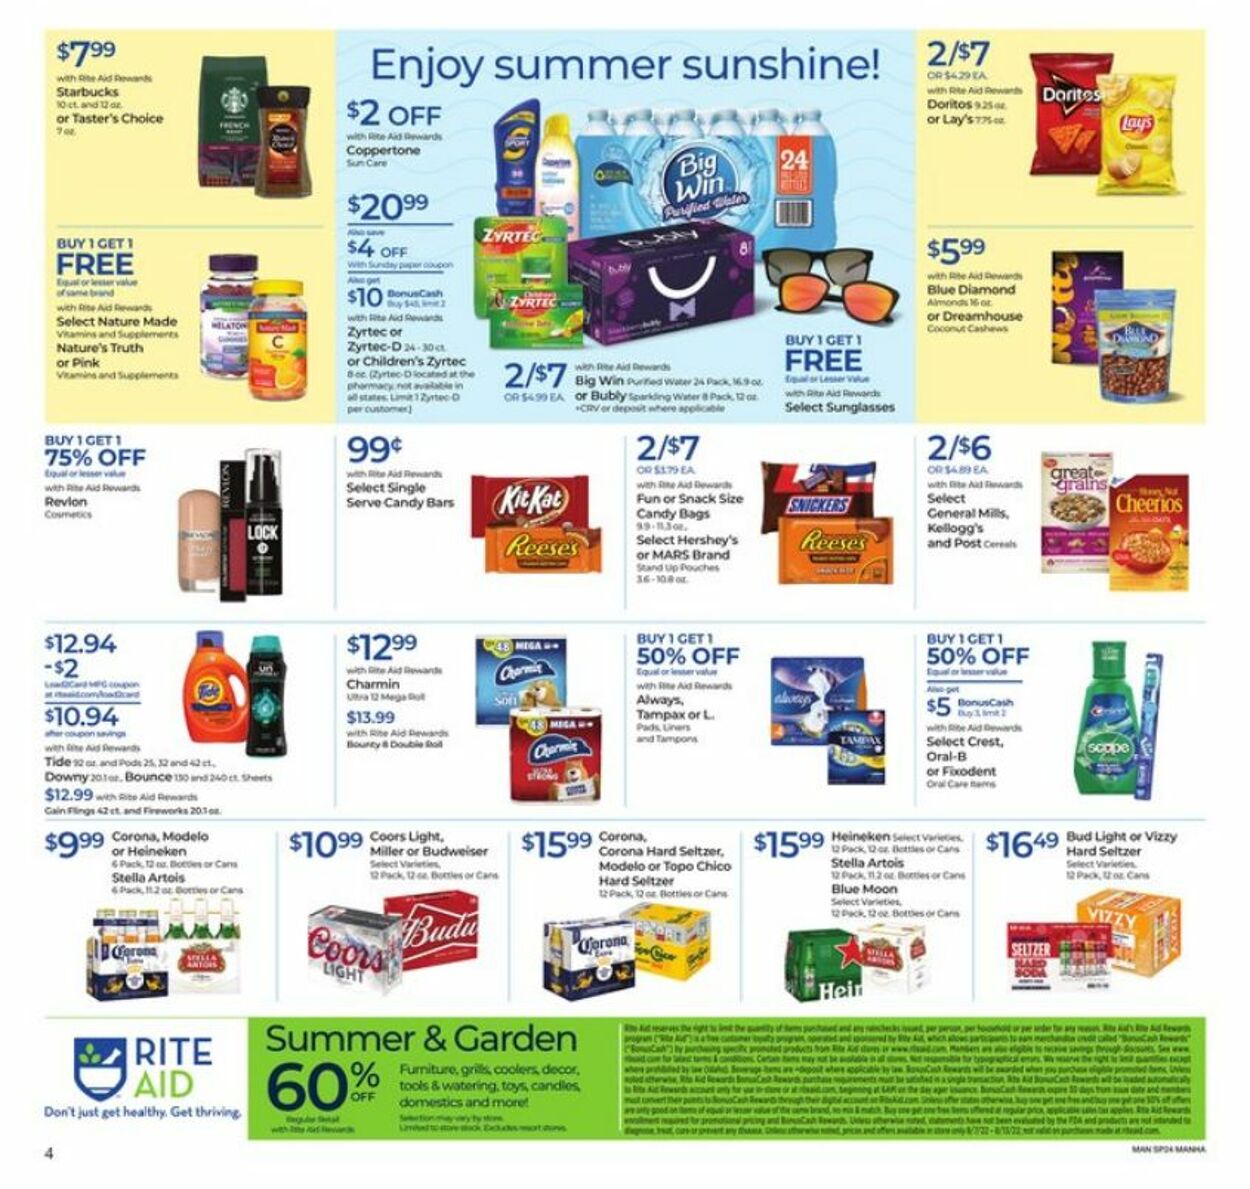 Weekly ad Rite Aid 08/07/2022 - 08/13/2022